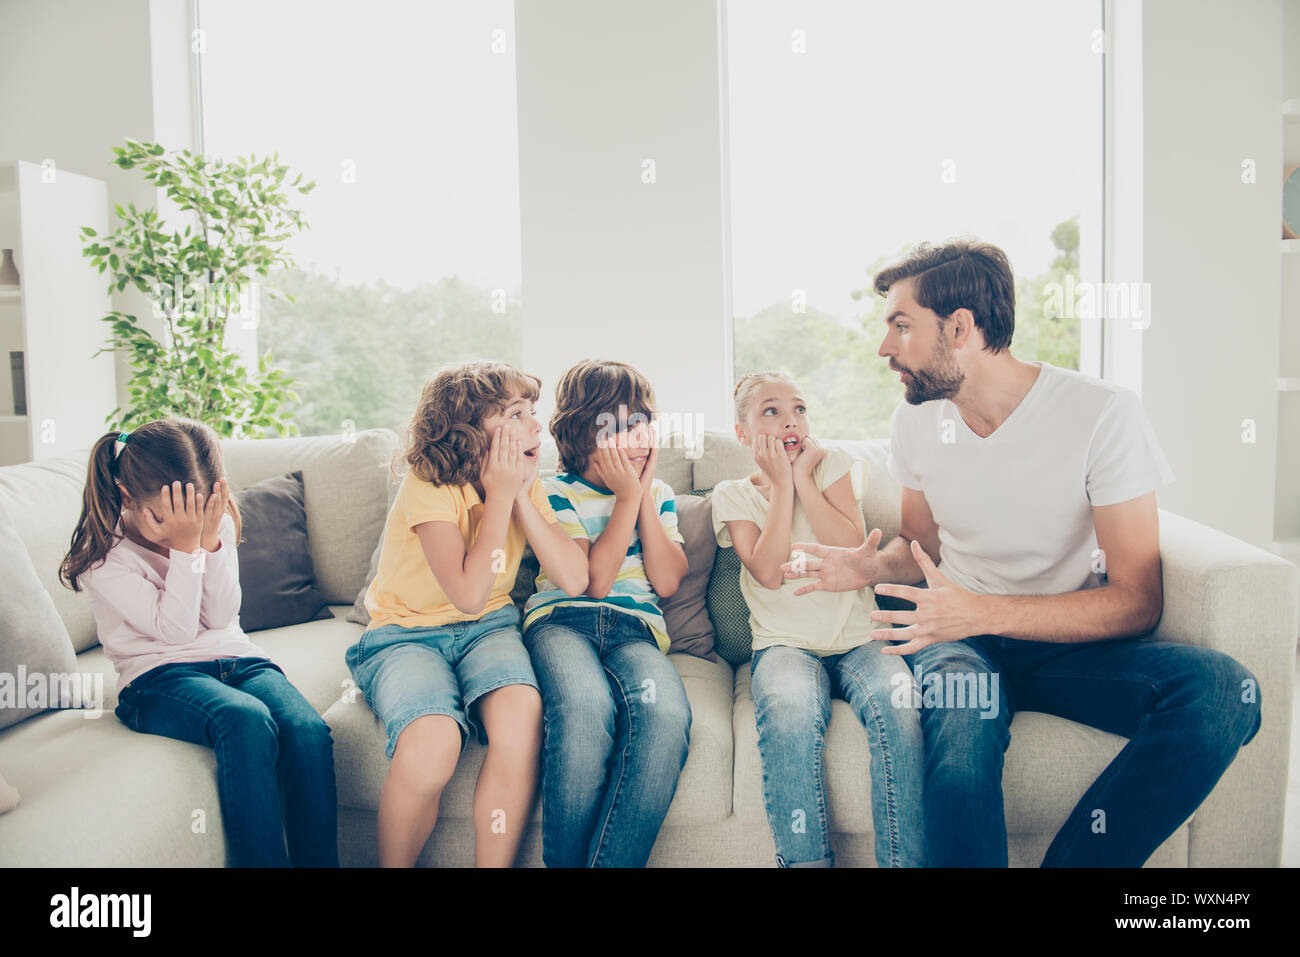 Free time preteen pre-teen concept. Babysitter tell scare story Stock Photo